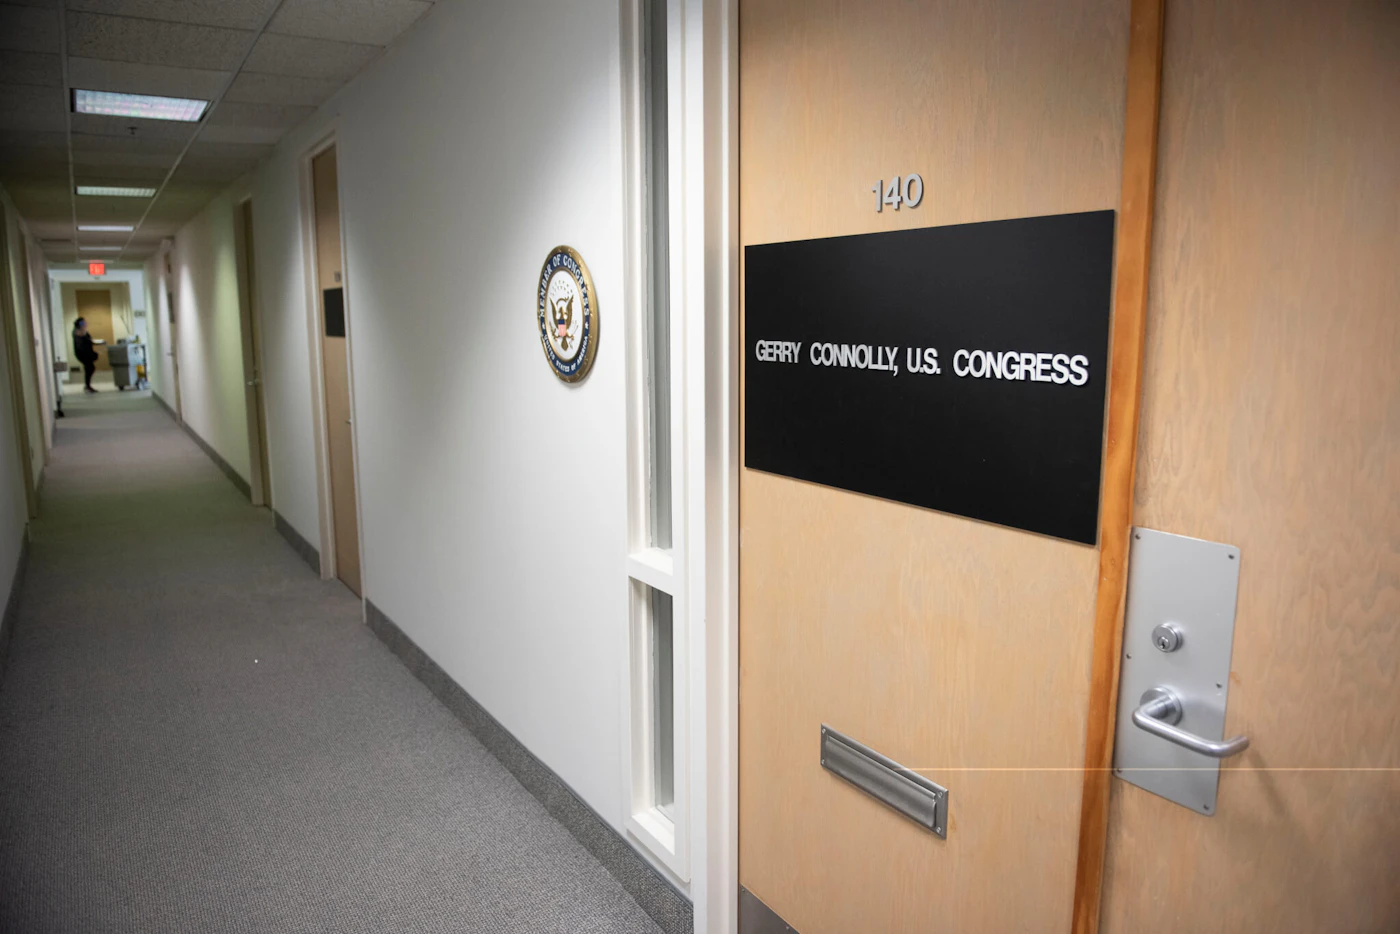 The Fairfax, Va., office of Rep. Gerry Connelly, D-Va., is shown on Monday, May 15, 2023, after police said a man with a metal baseball bat walked into the office, asked for Connelly, and then struck two members of his staff with the bat. Fairfax City Police in northern Virginia said in a tweet that a suspect is in custody and the victims are being treated for injuries that are not life-threatening. (AP Photo/Cliff Owen)